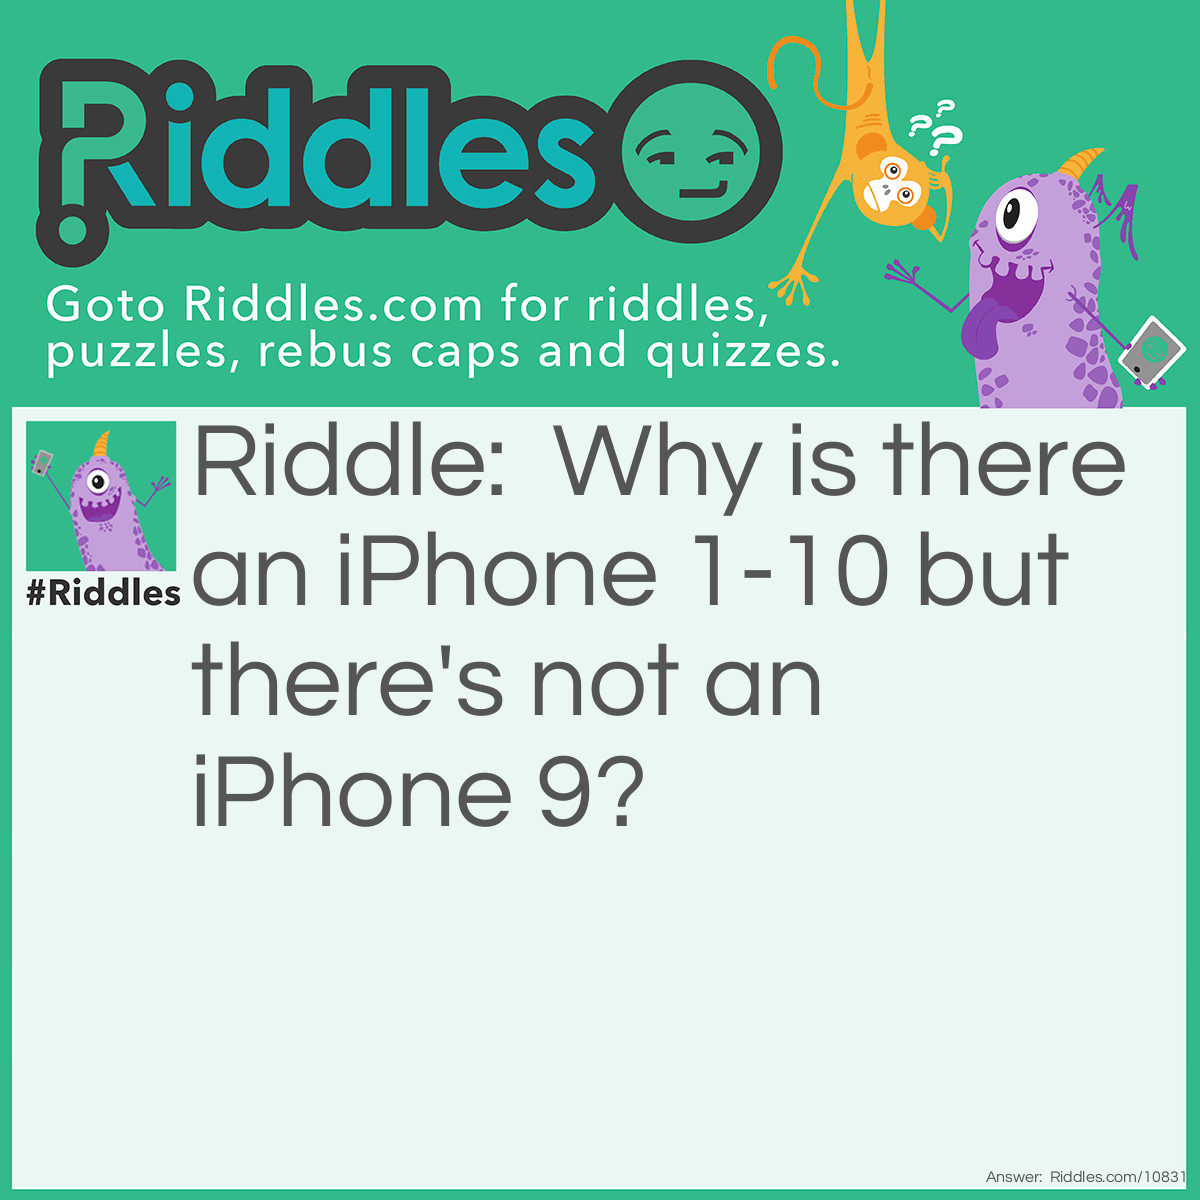 Riddle: Why is there an iPhone 1-10 but there's not an iPhone 9? Answer: Because 7 8 9(7 ate 9).